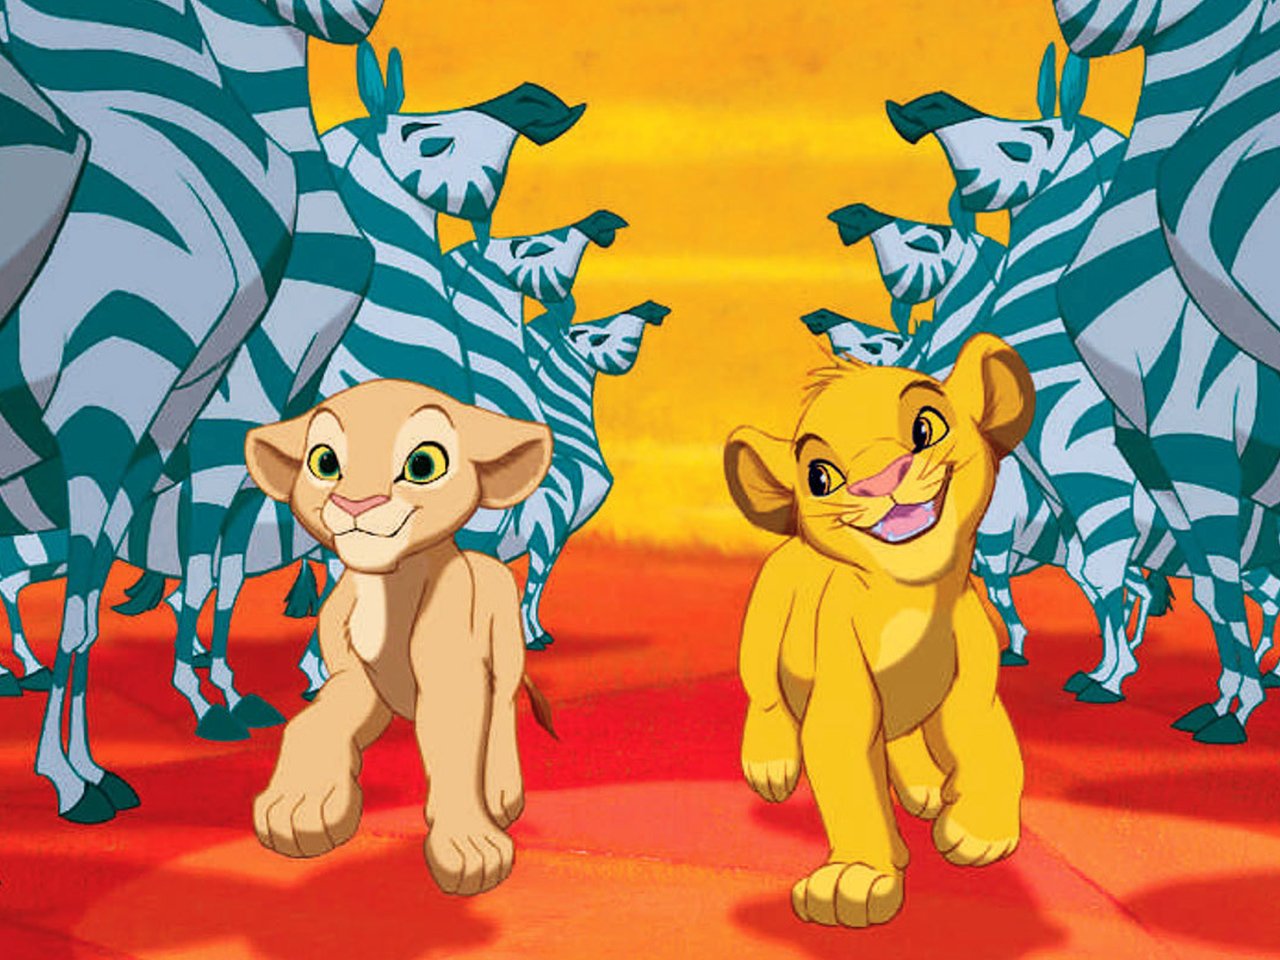 A still from the kids' animated movie The Lion King